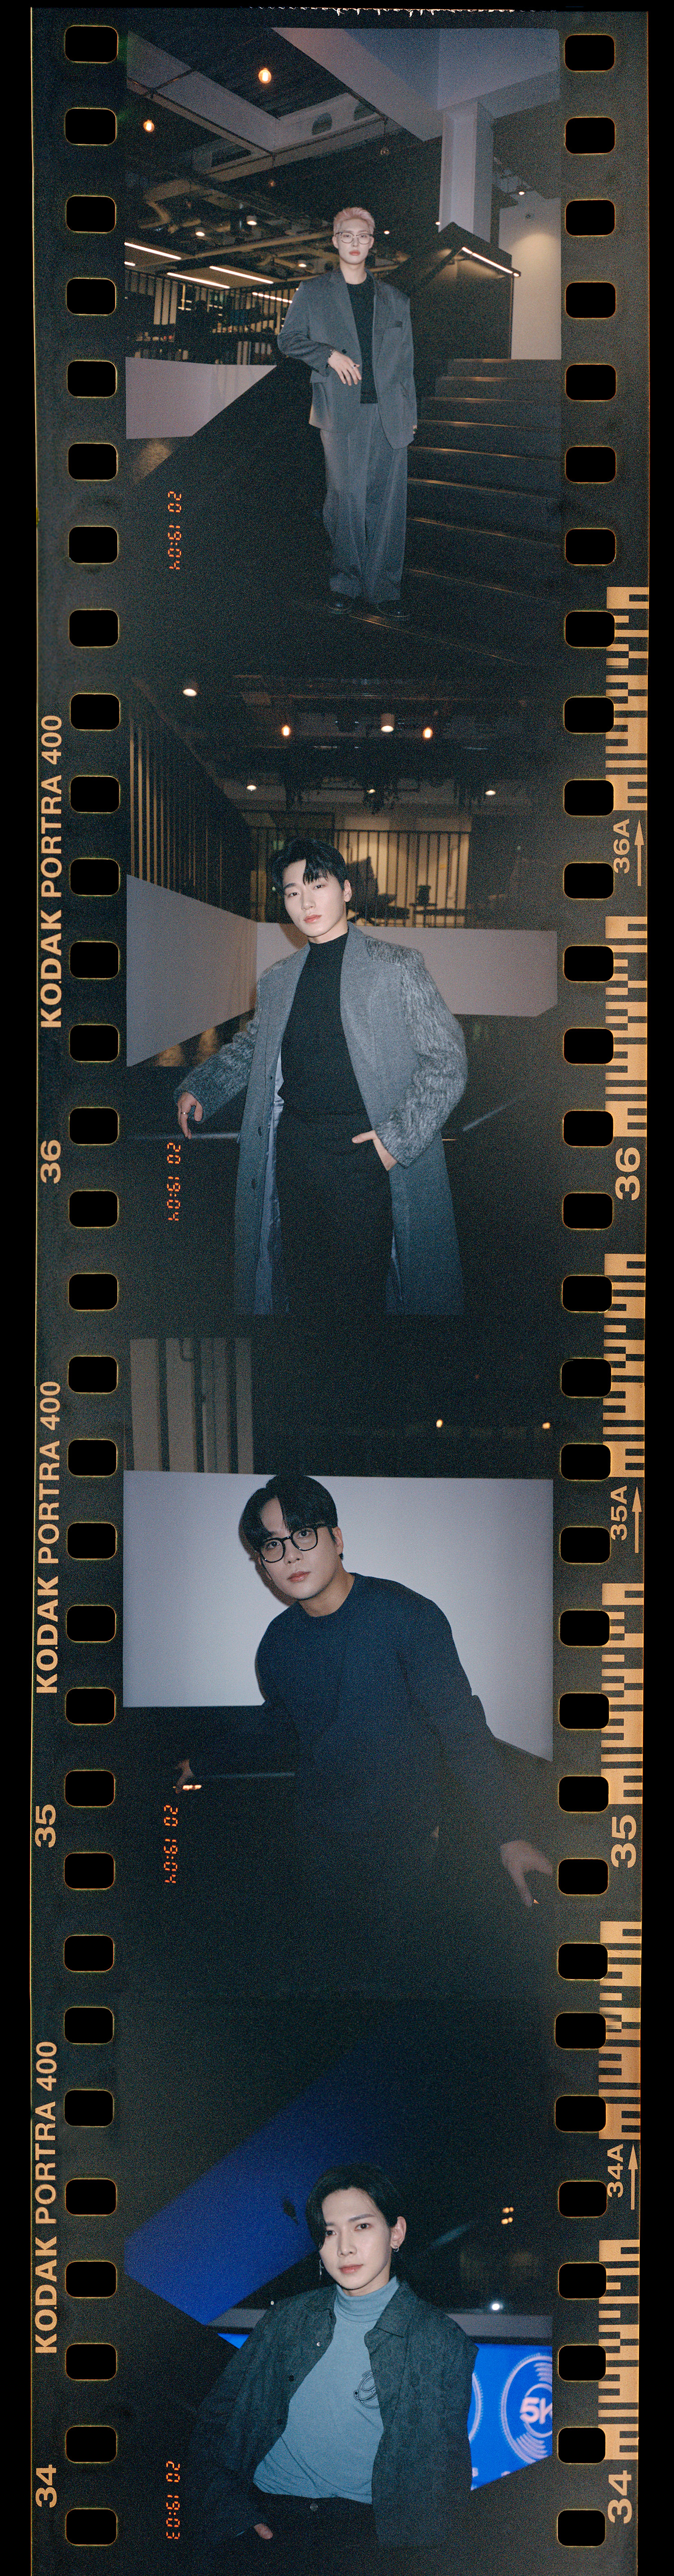 4 members of ATEEZ pose for individual portraits on film